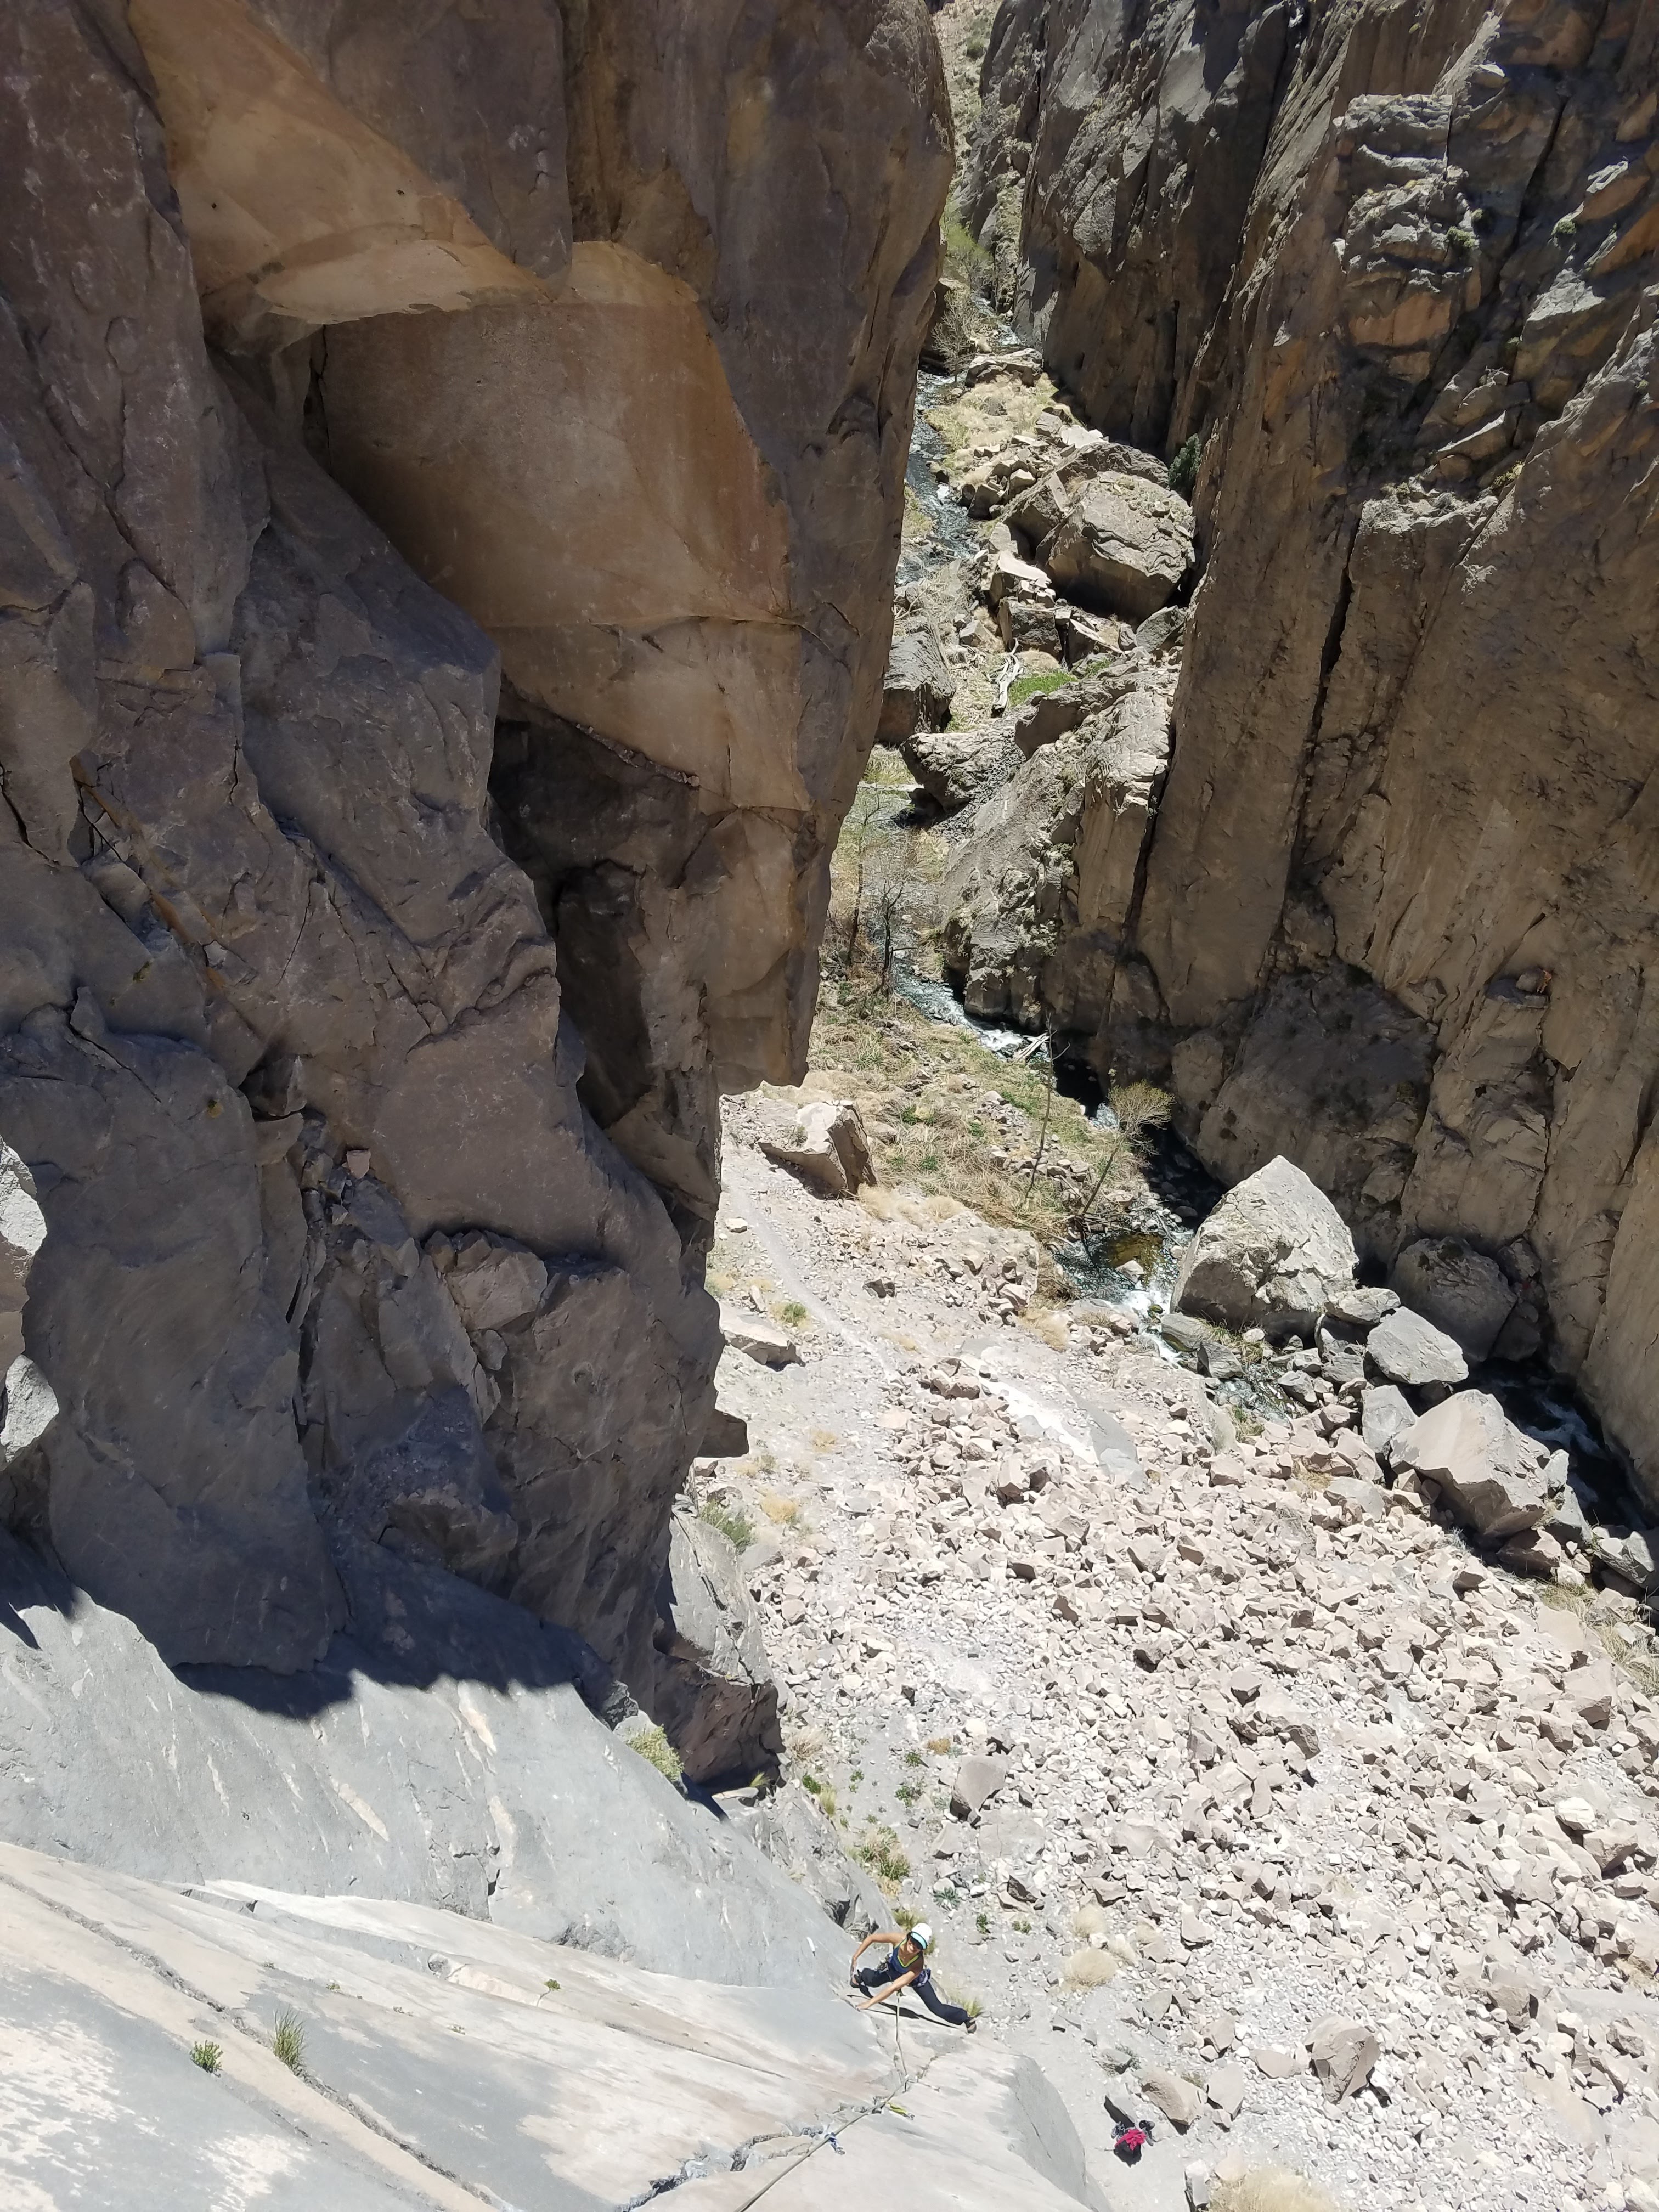 We climbed a climb called Slip and Slide in Owens River Gorge. Half slab, half crack, all fun. This is a picture of me that Geoff took from the top looking down as I follow him up the climb.